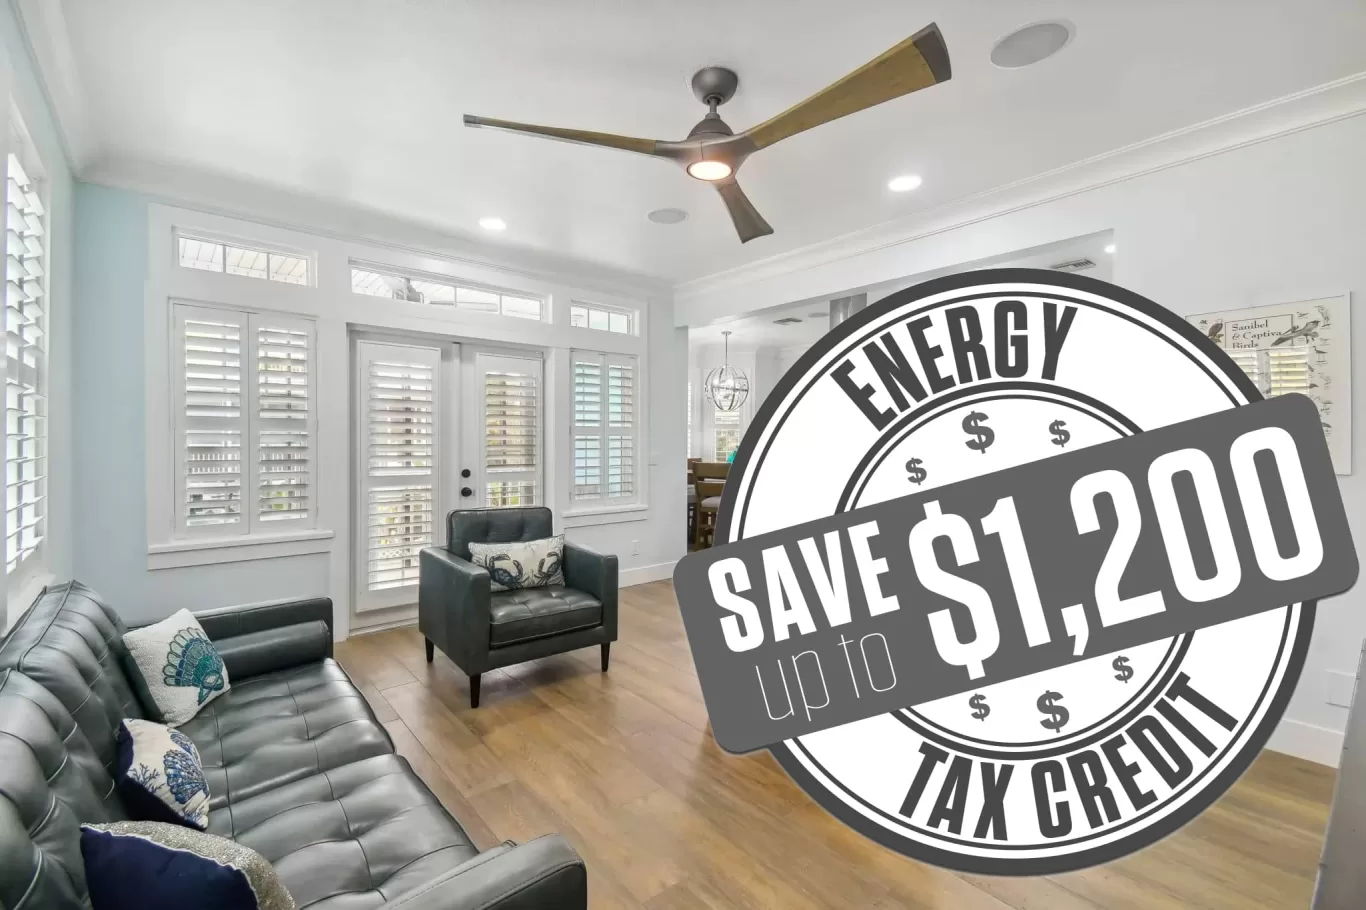 LouverWood shutters qualify for the Federal Energy Tax Credit